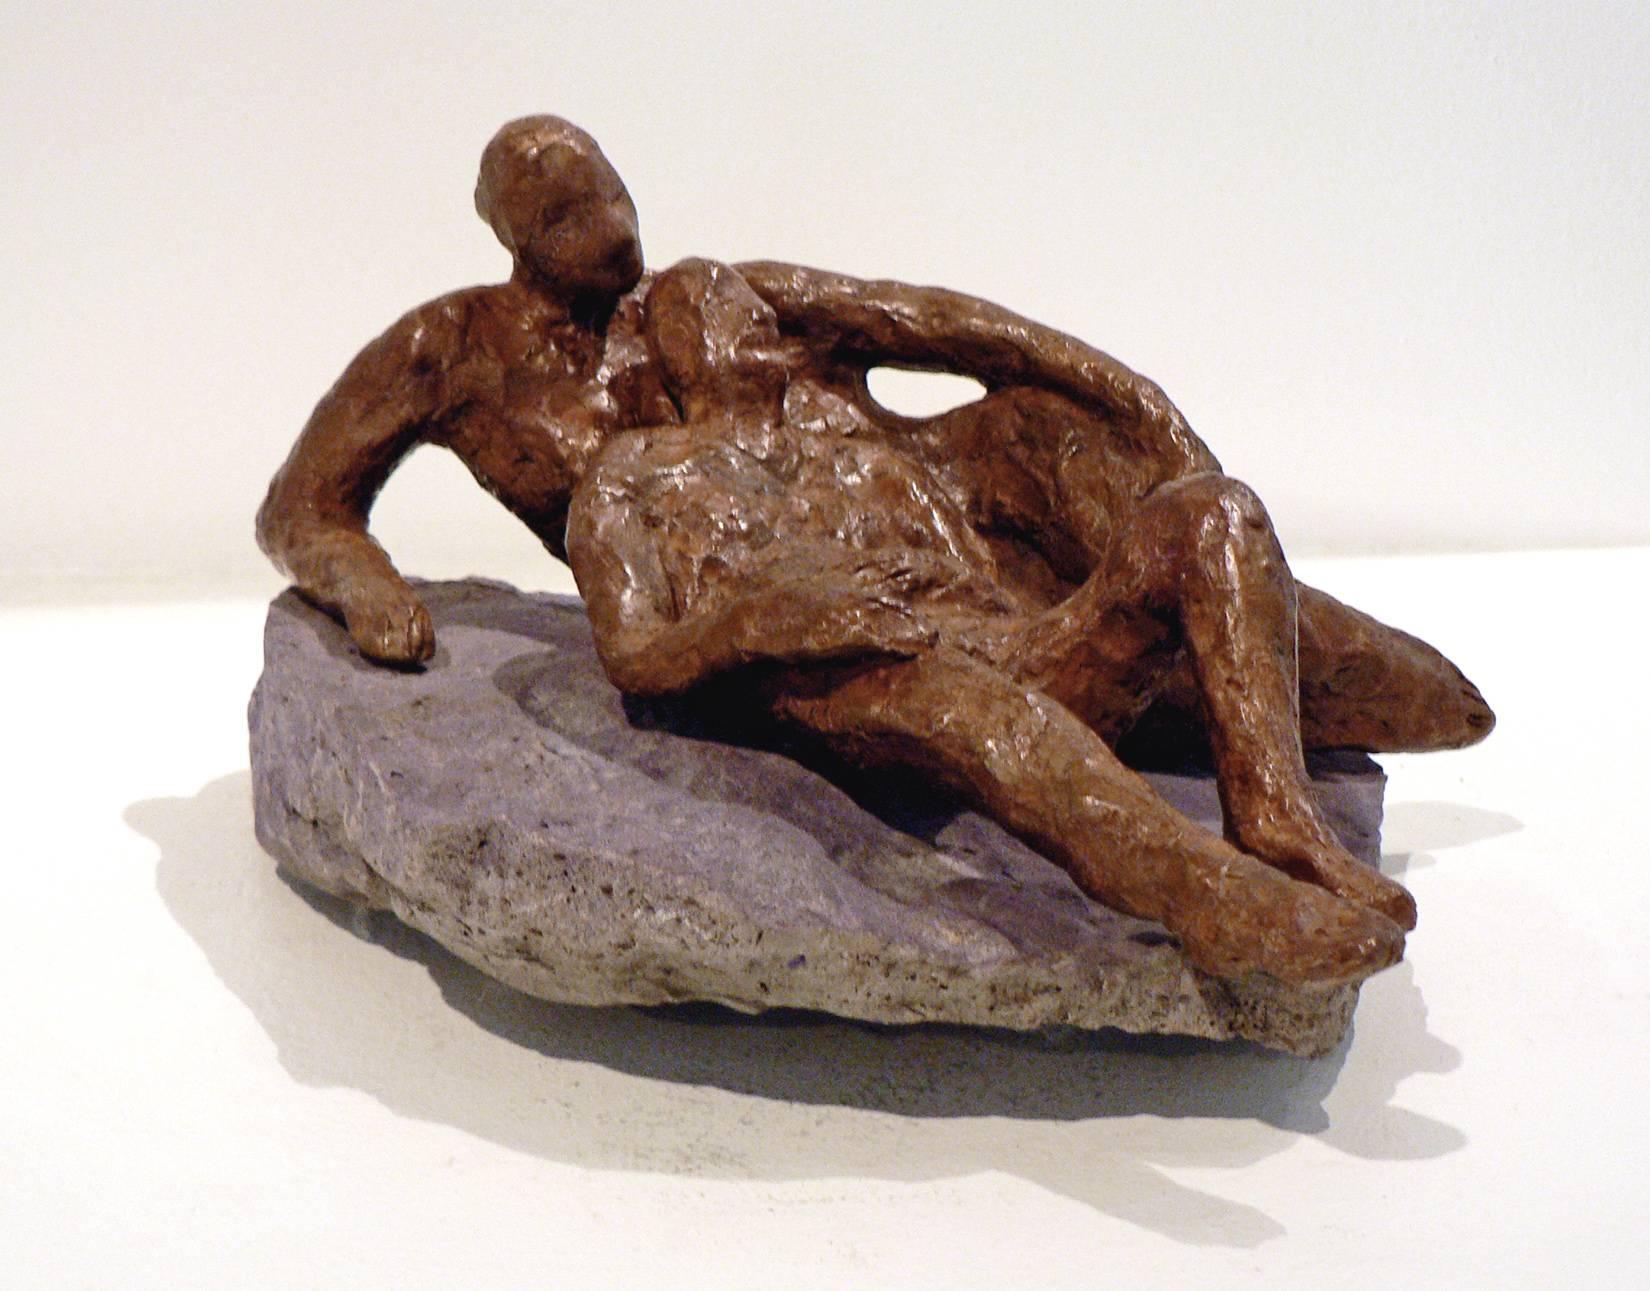 A bronze couple is comfortably laying down on a natural stone. Artist Noa Bornstein describes herself as “a draw-er”. Many of her sculptures begin as a quick drawing or impression - from memory, from dreams, or from life itself. “Watching a man